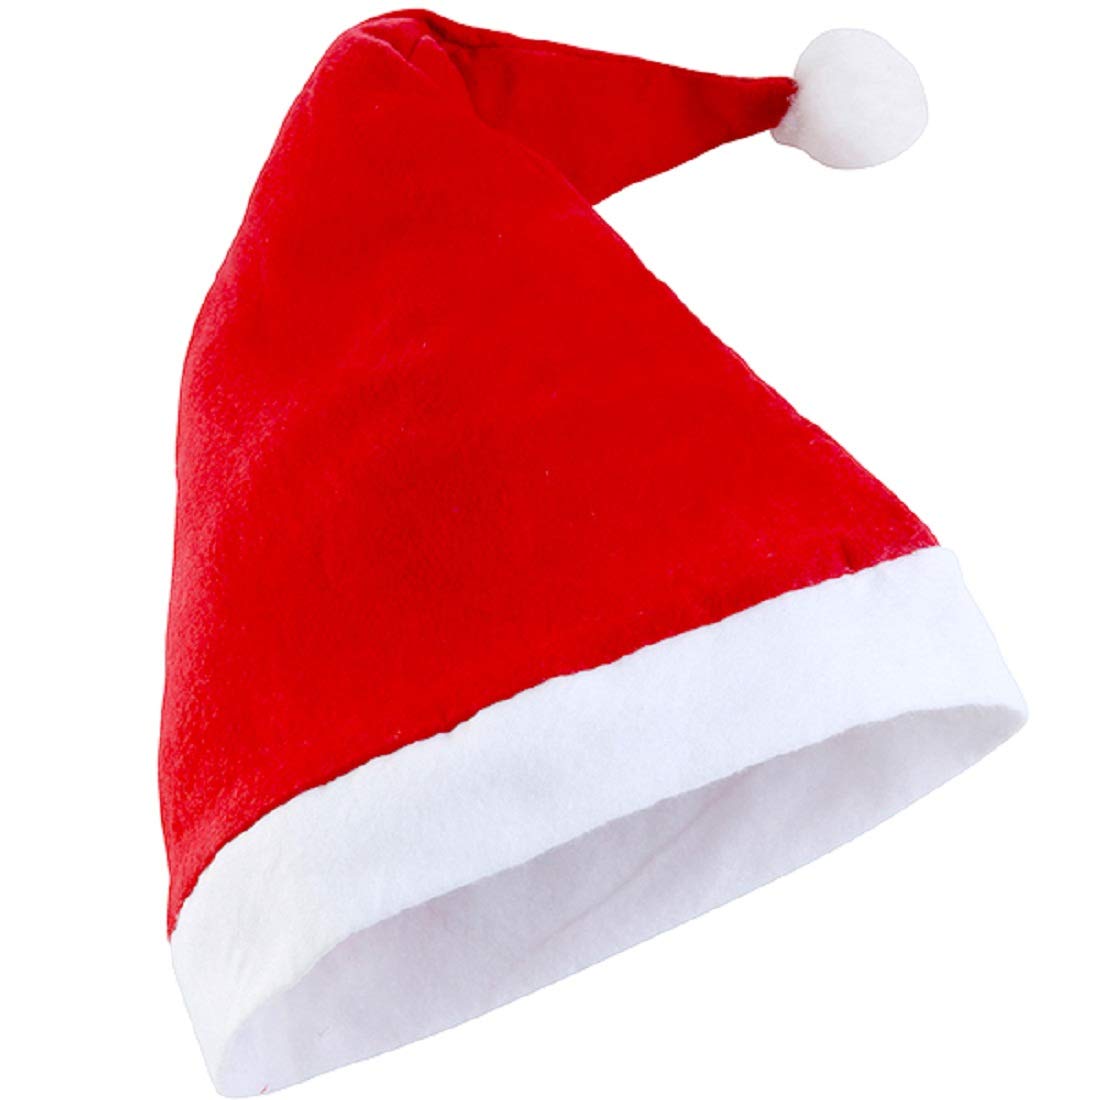 eCraftIndia Red and White Merry Christmas Hats, Santa Claus Caps for kids and Adults - Free Size XMAS Caps, Santa Claus Hats for Christmas, New Year, Festive Holiday Party (Set of 6) 2